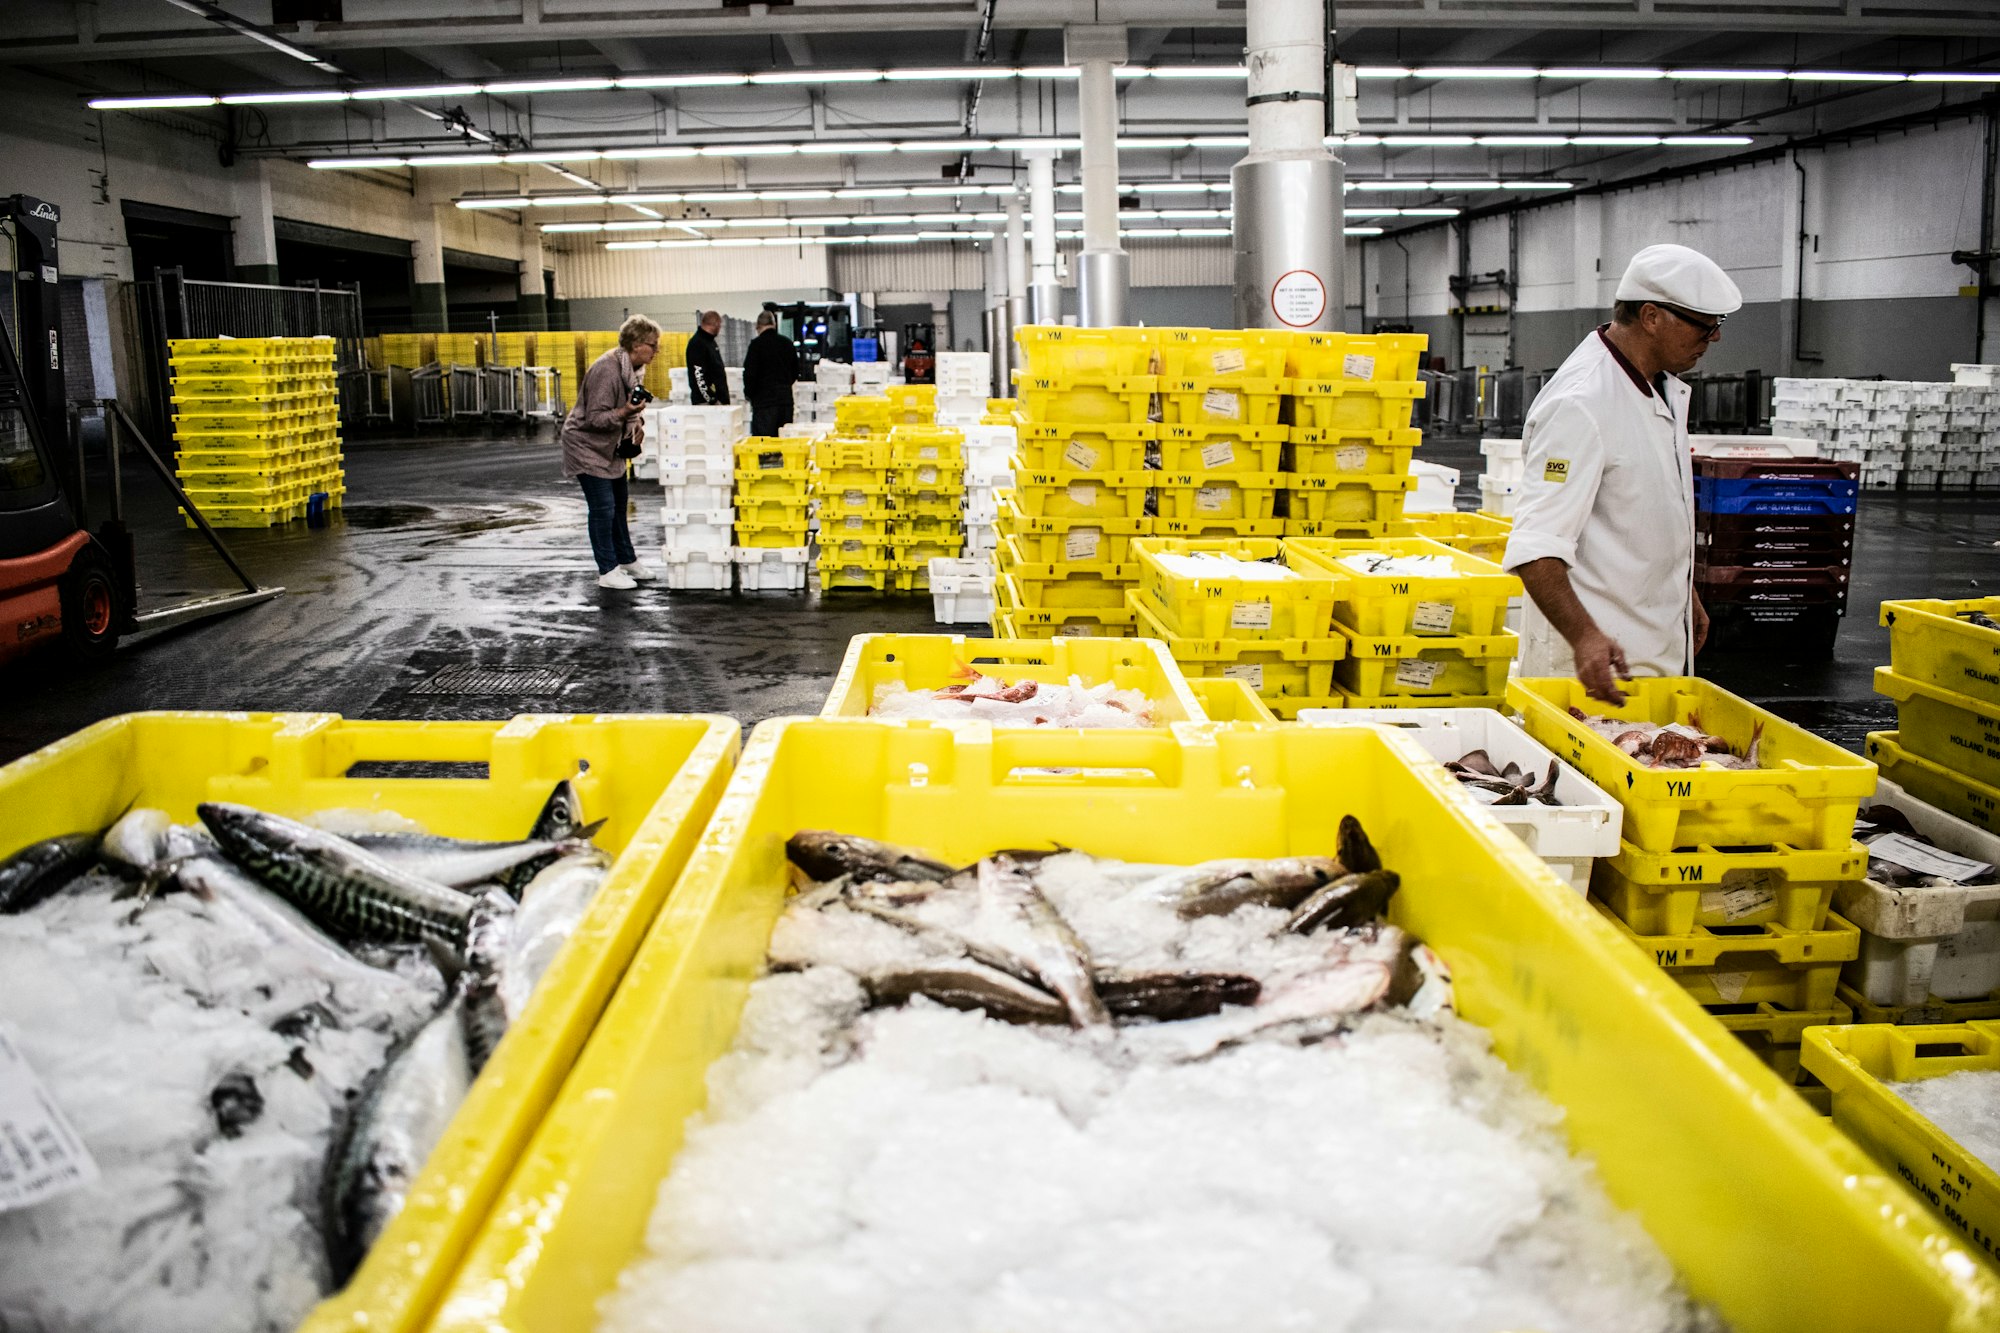 Indonesian aquaculture startup eFishery nets $200M in its Series D